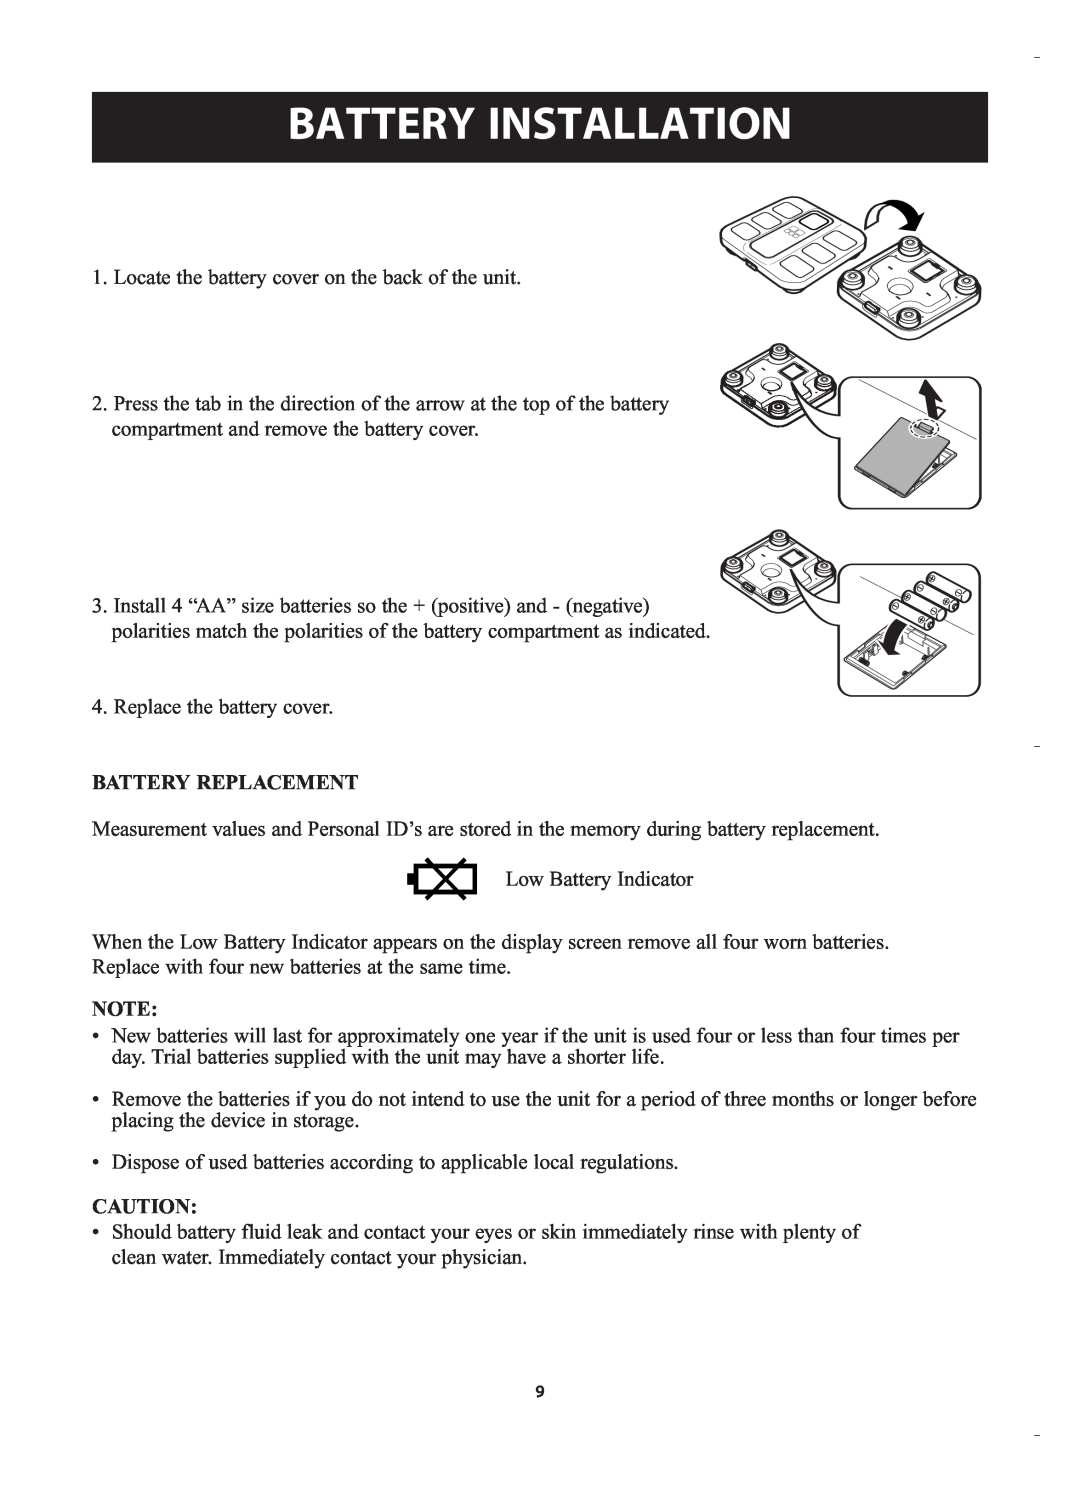 Omron HBF-400 instruction manual Battery Installation, Battery Replacement 